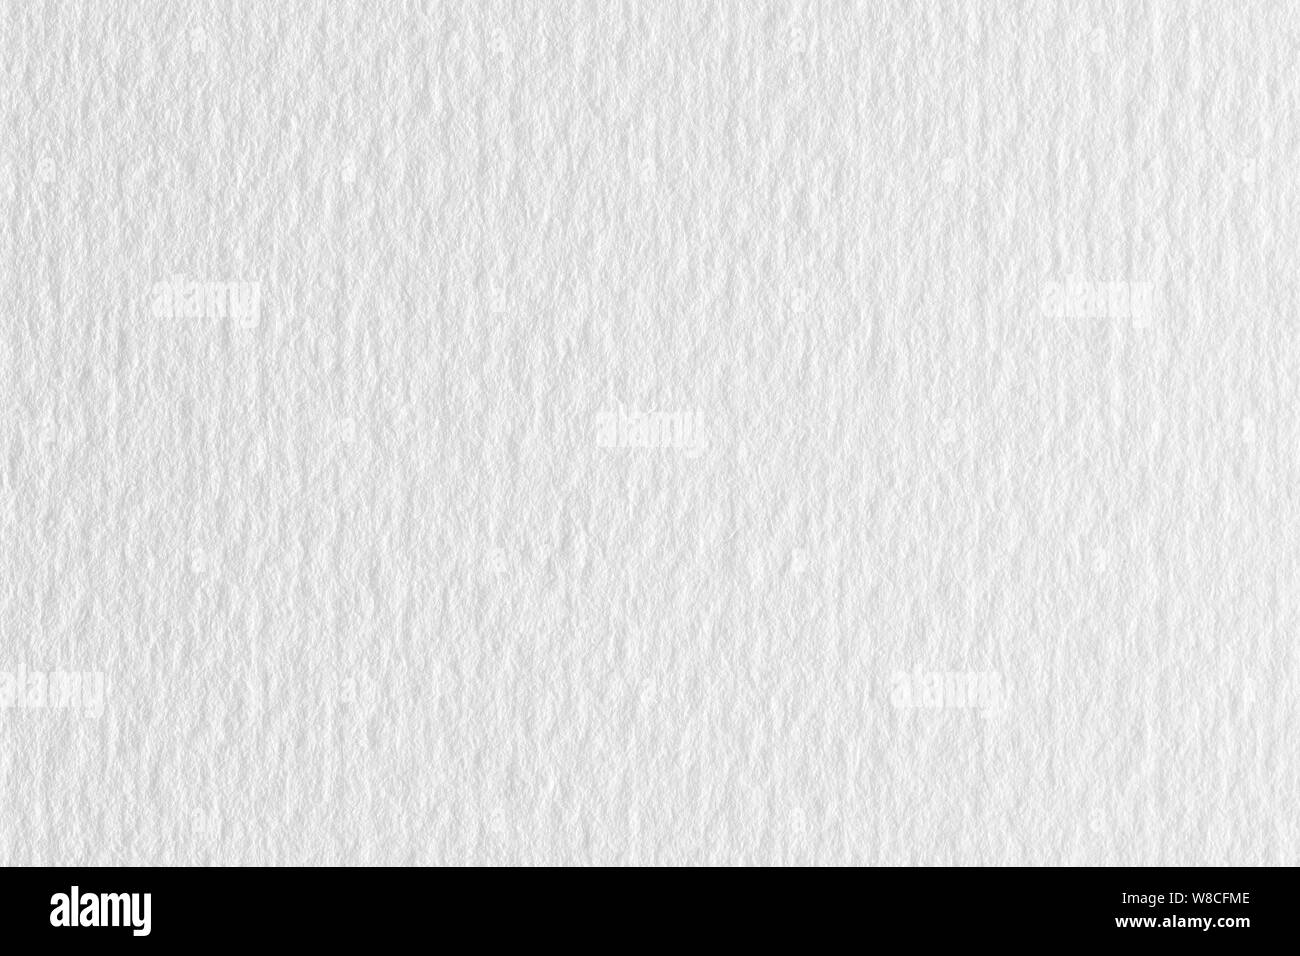 Soft white paper background, rough pattern stationery texture Stock Photo -  Alamy